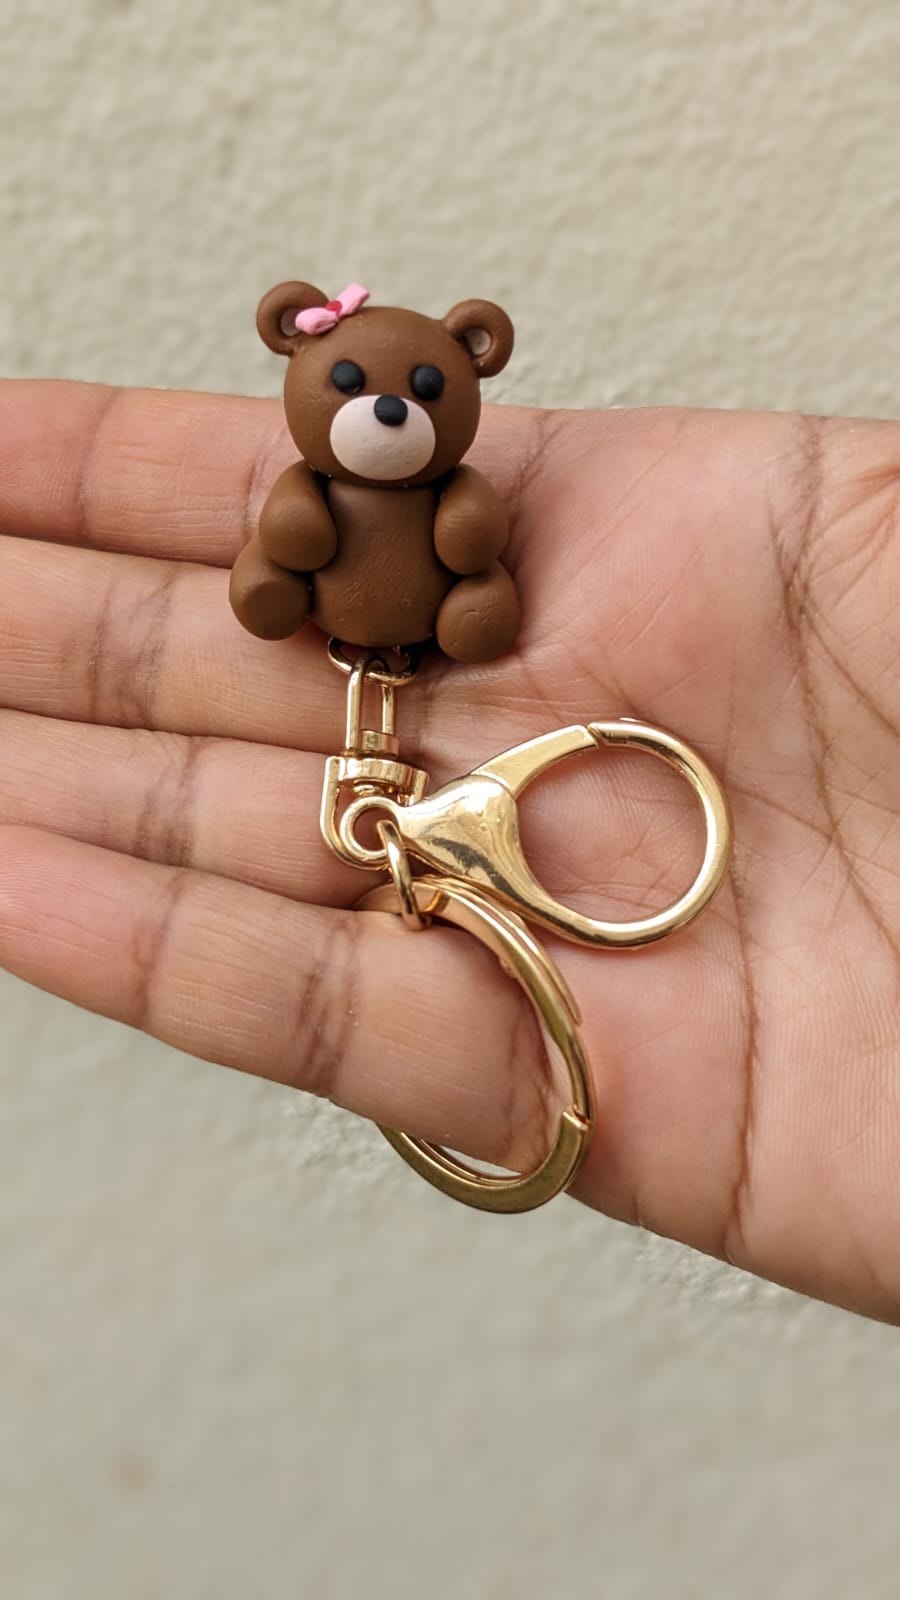 Bear key chain for her